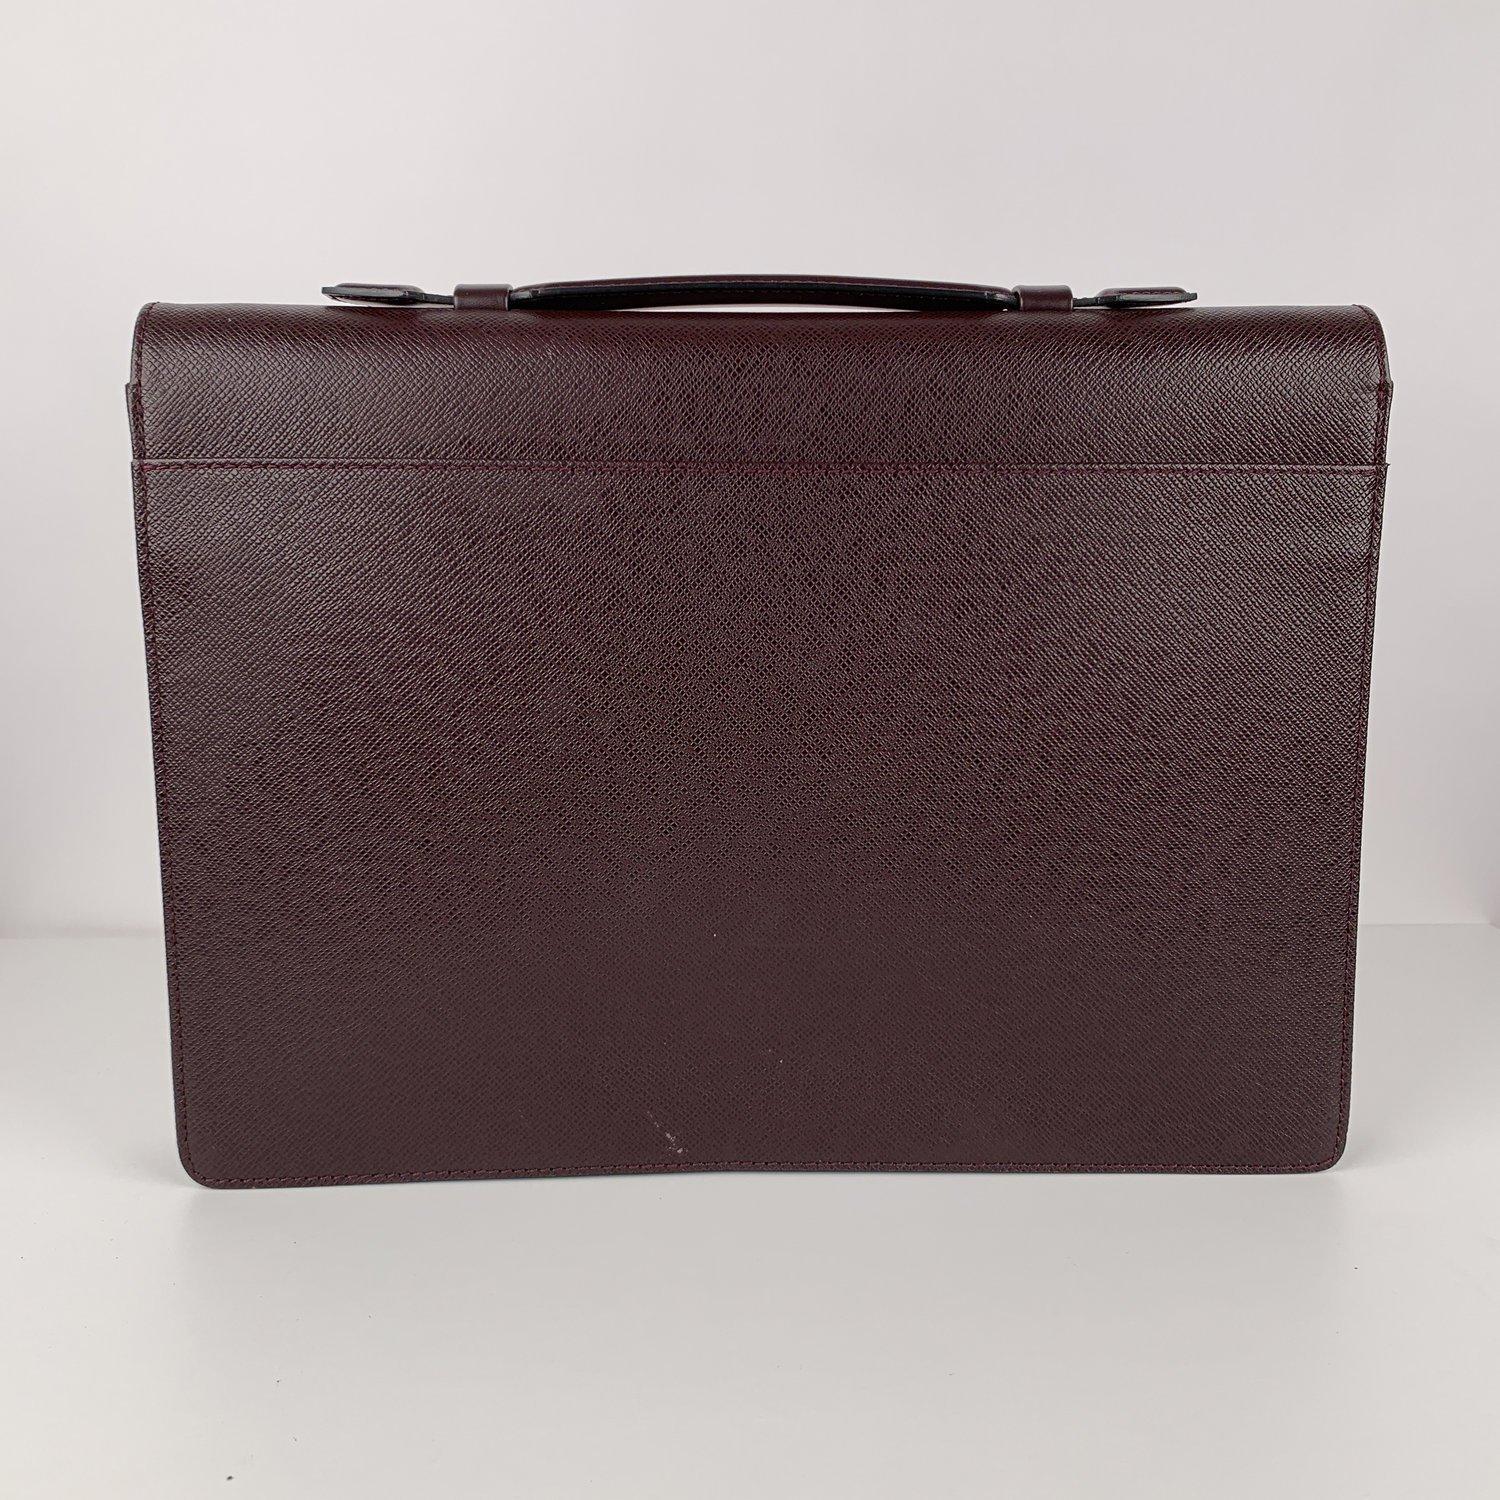 MATERIAL: Leather COLOR: Burgundy MODEL: Breifcase GENDER: Women, Men SIZE: Large Condition CONDITION DETAILS: A :EXCELLENT CONDITION - Used once or twice. Looks mint. Imperceptible signs of wear may be present due to storage - Minimal scratches on